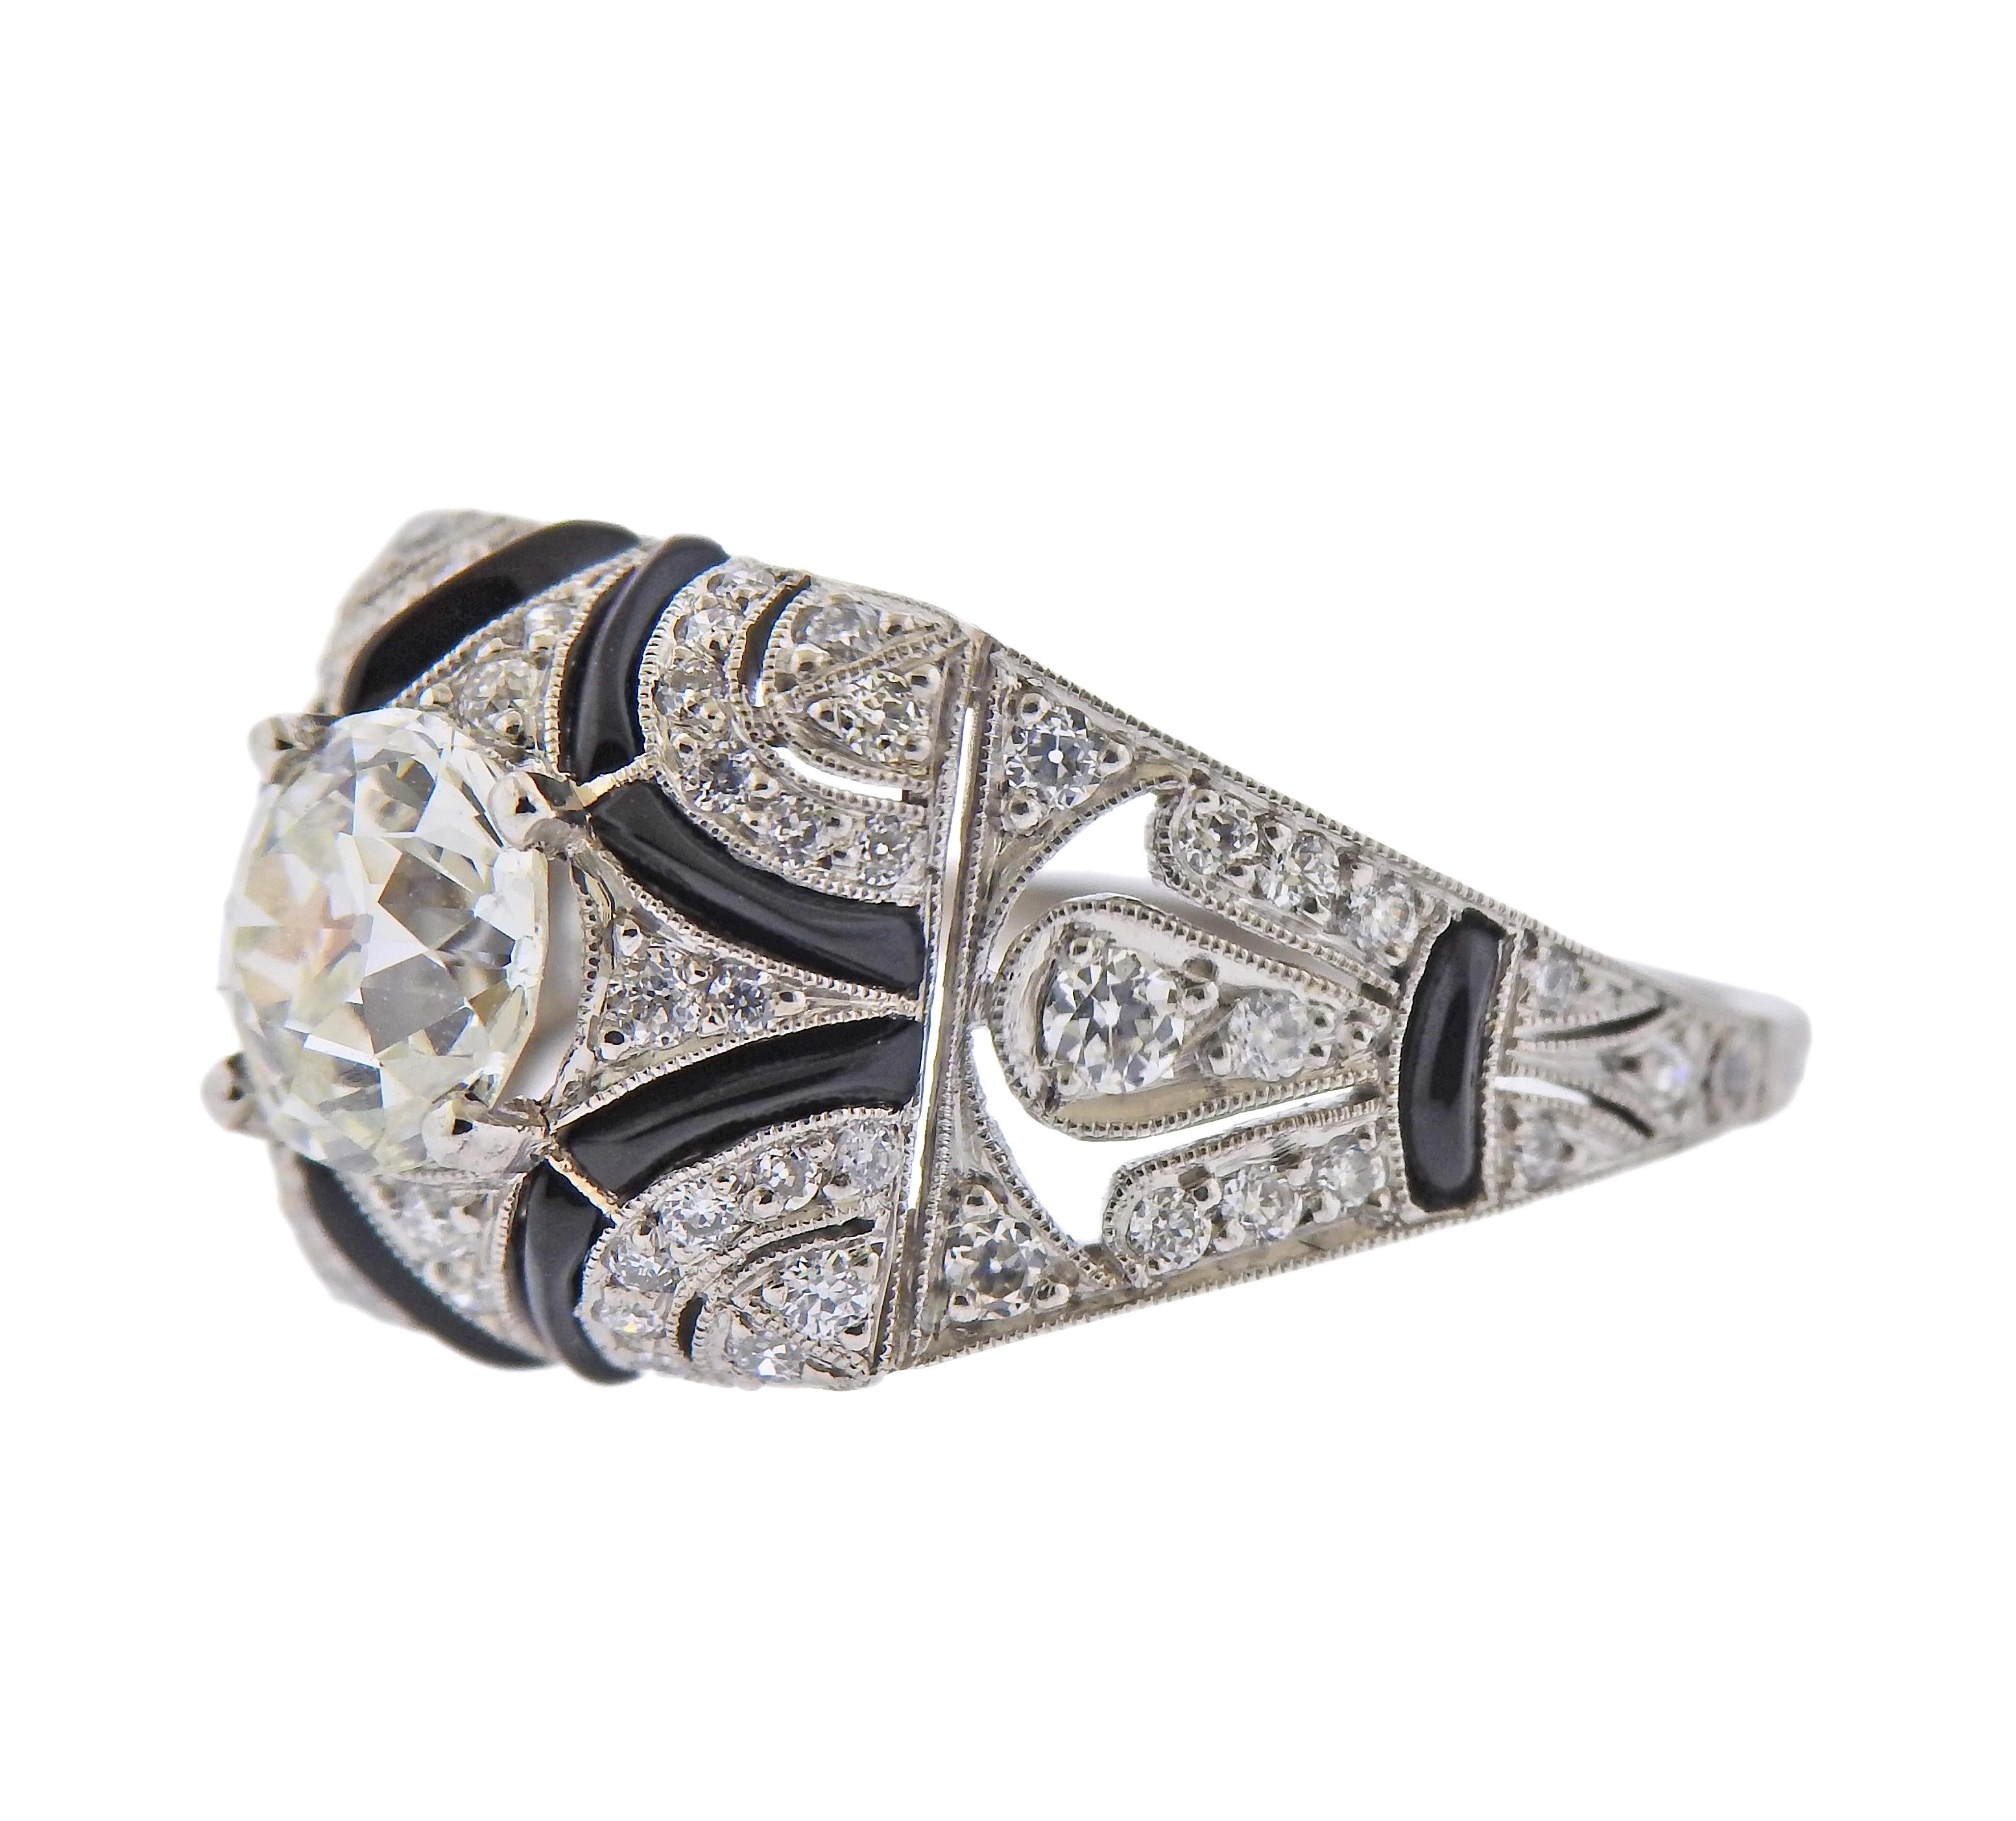 Art Deco platinum ring, with center 1.19ct J-K/VS1 old European diamond in the center, set with approx. 0.30cts in side diamonds and onyx. Ring size - 6.5, ring top - 12mm wide. Weight - 5.2 grams. 